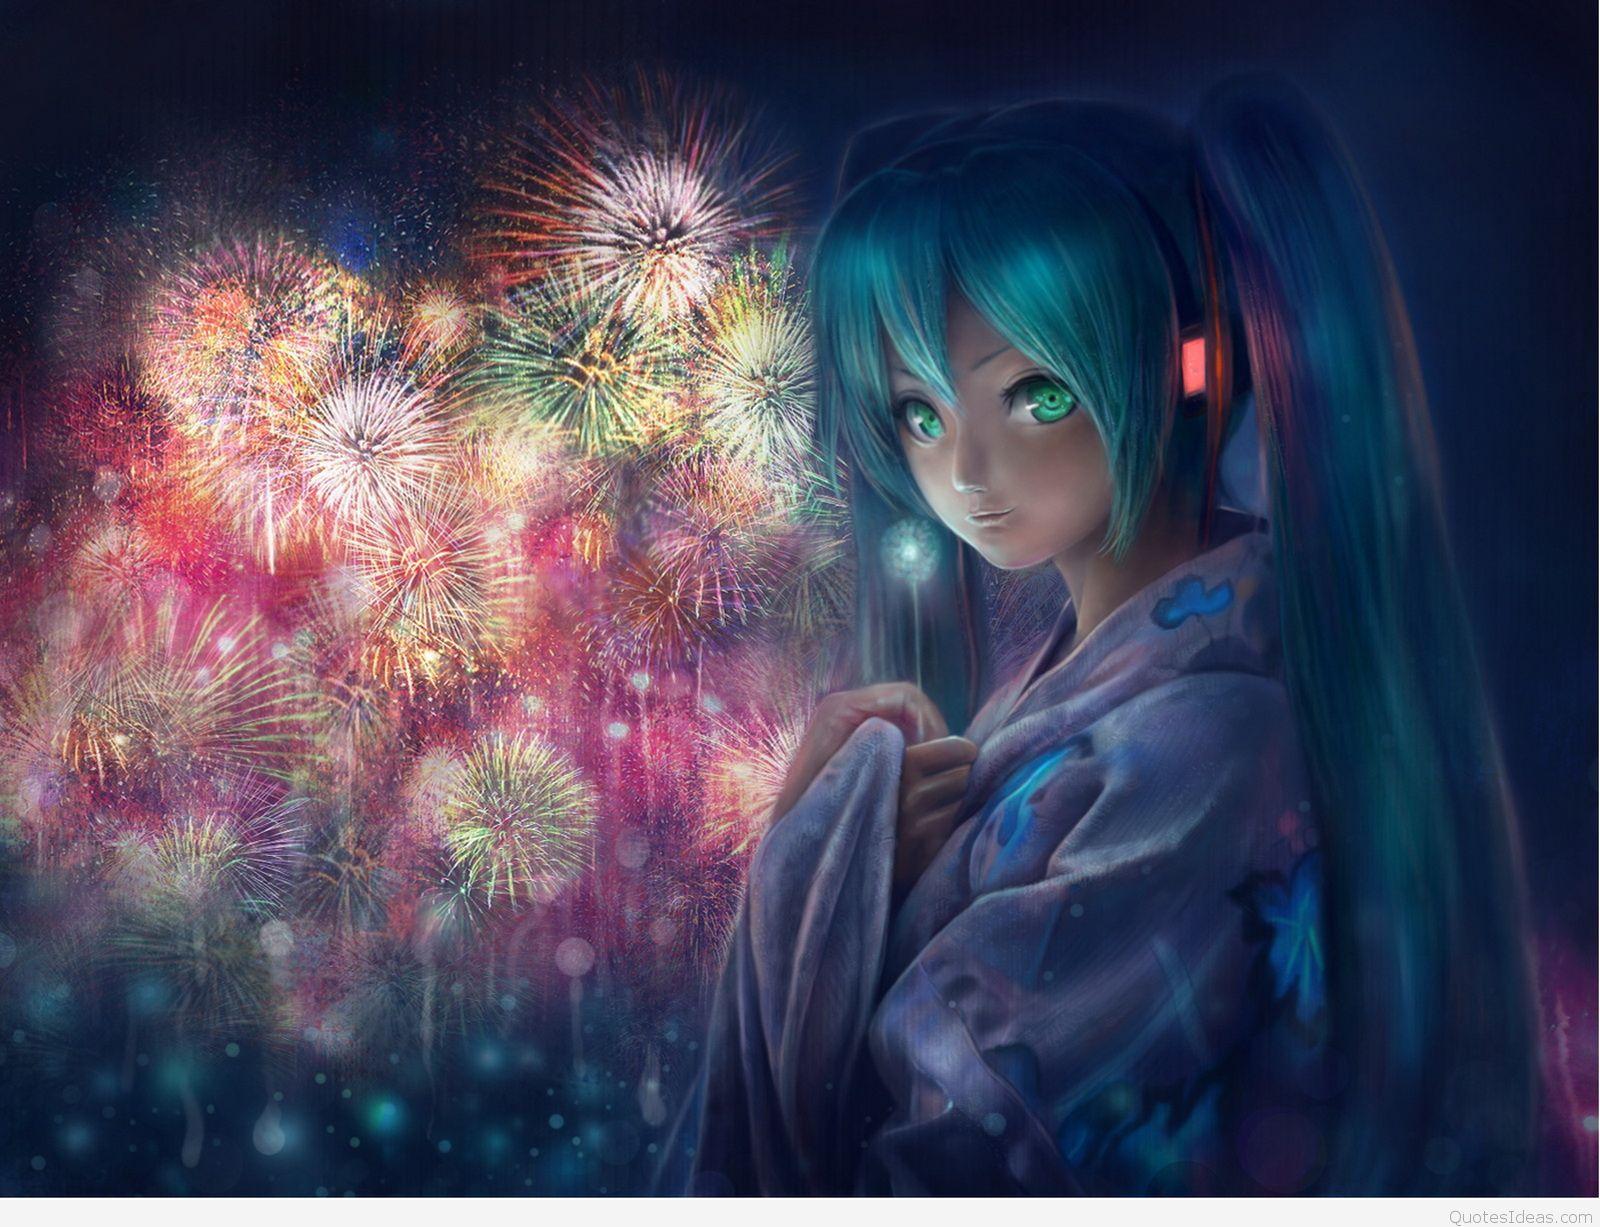 Anime Boys And Girls Lights In Fireworks Sky Background HD Anime Wallpapers   HD Wallpapers  ID 97786